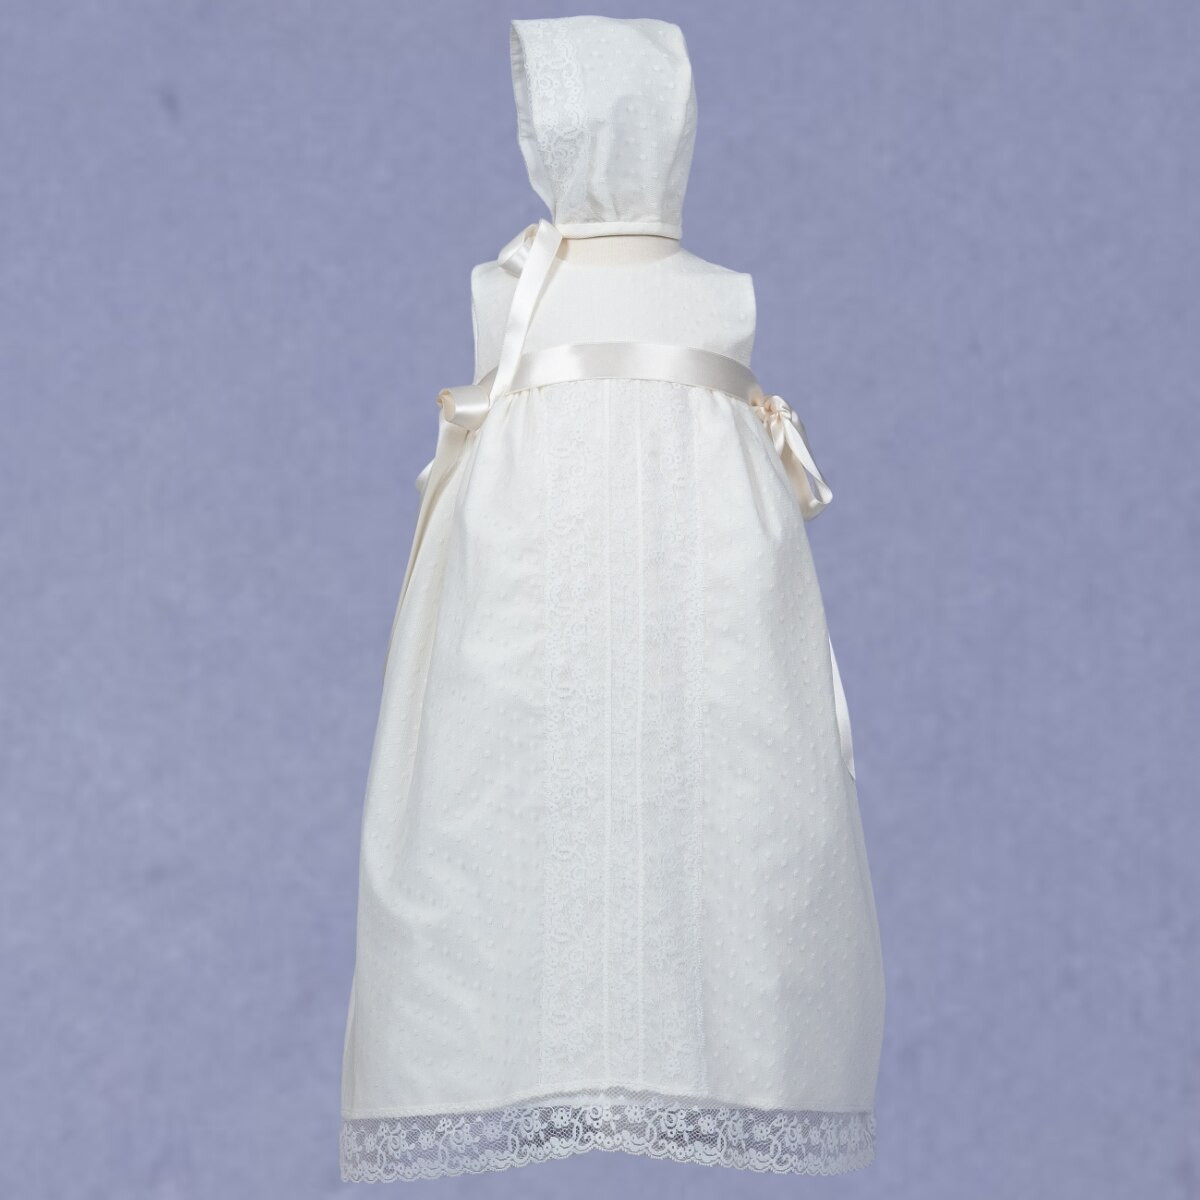 TULLE CHRISTENING GOWN WITH BONNET MISHA BABY - 1